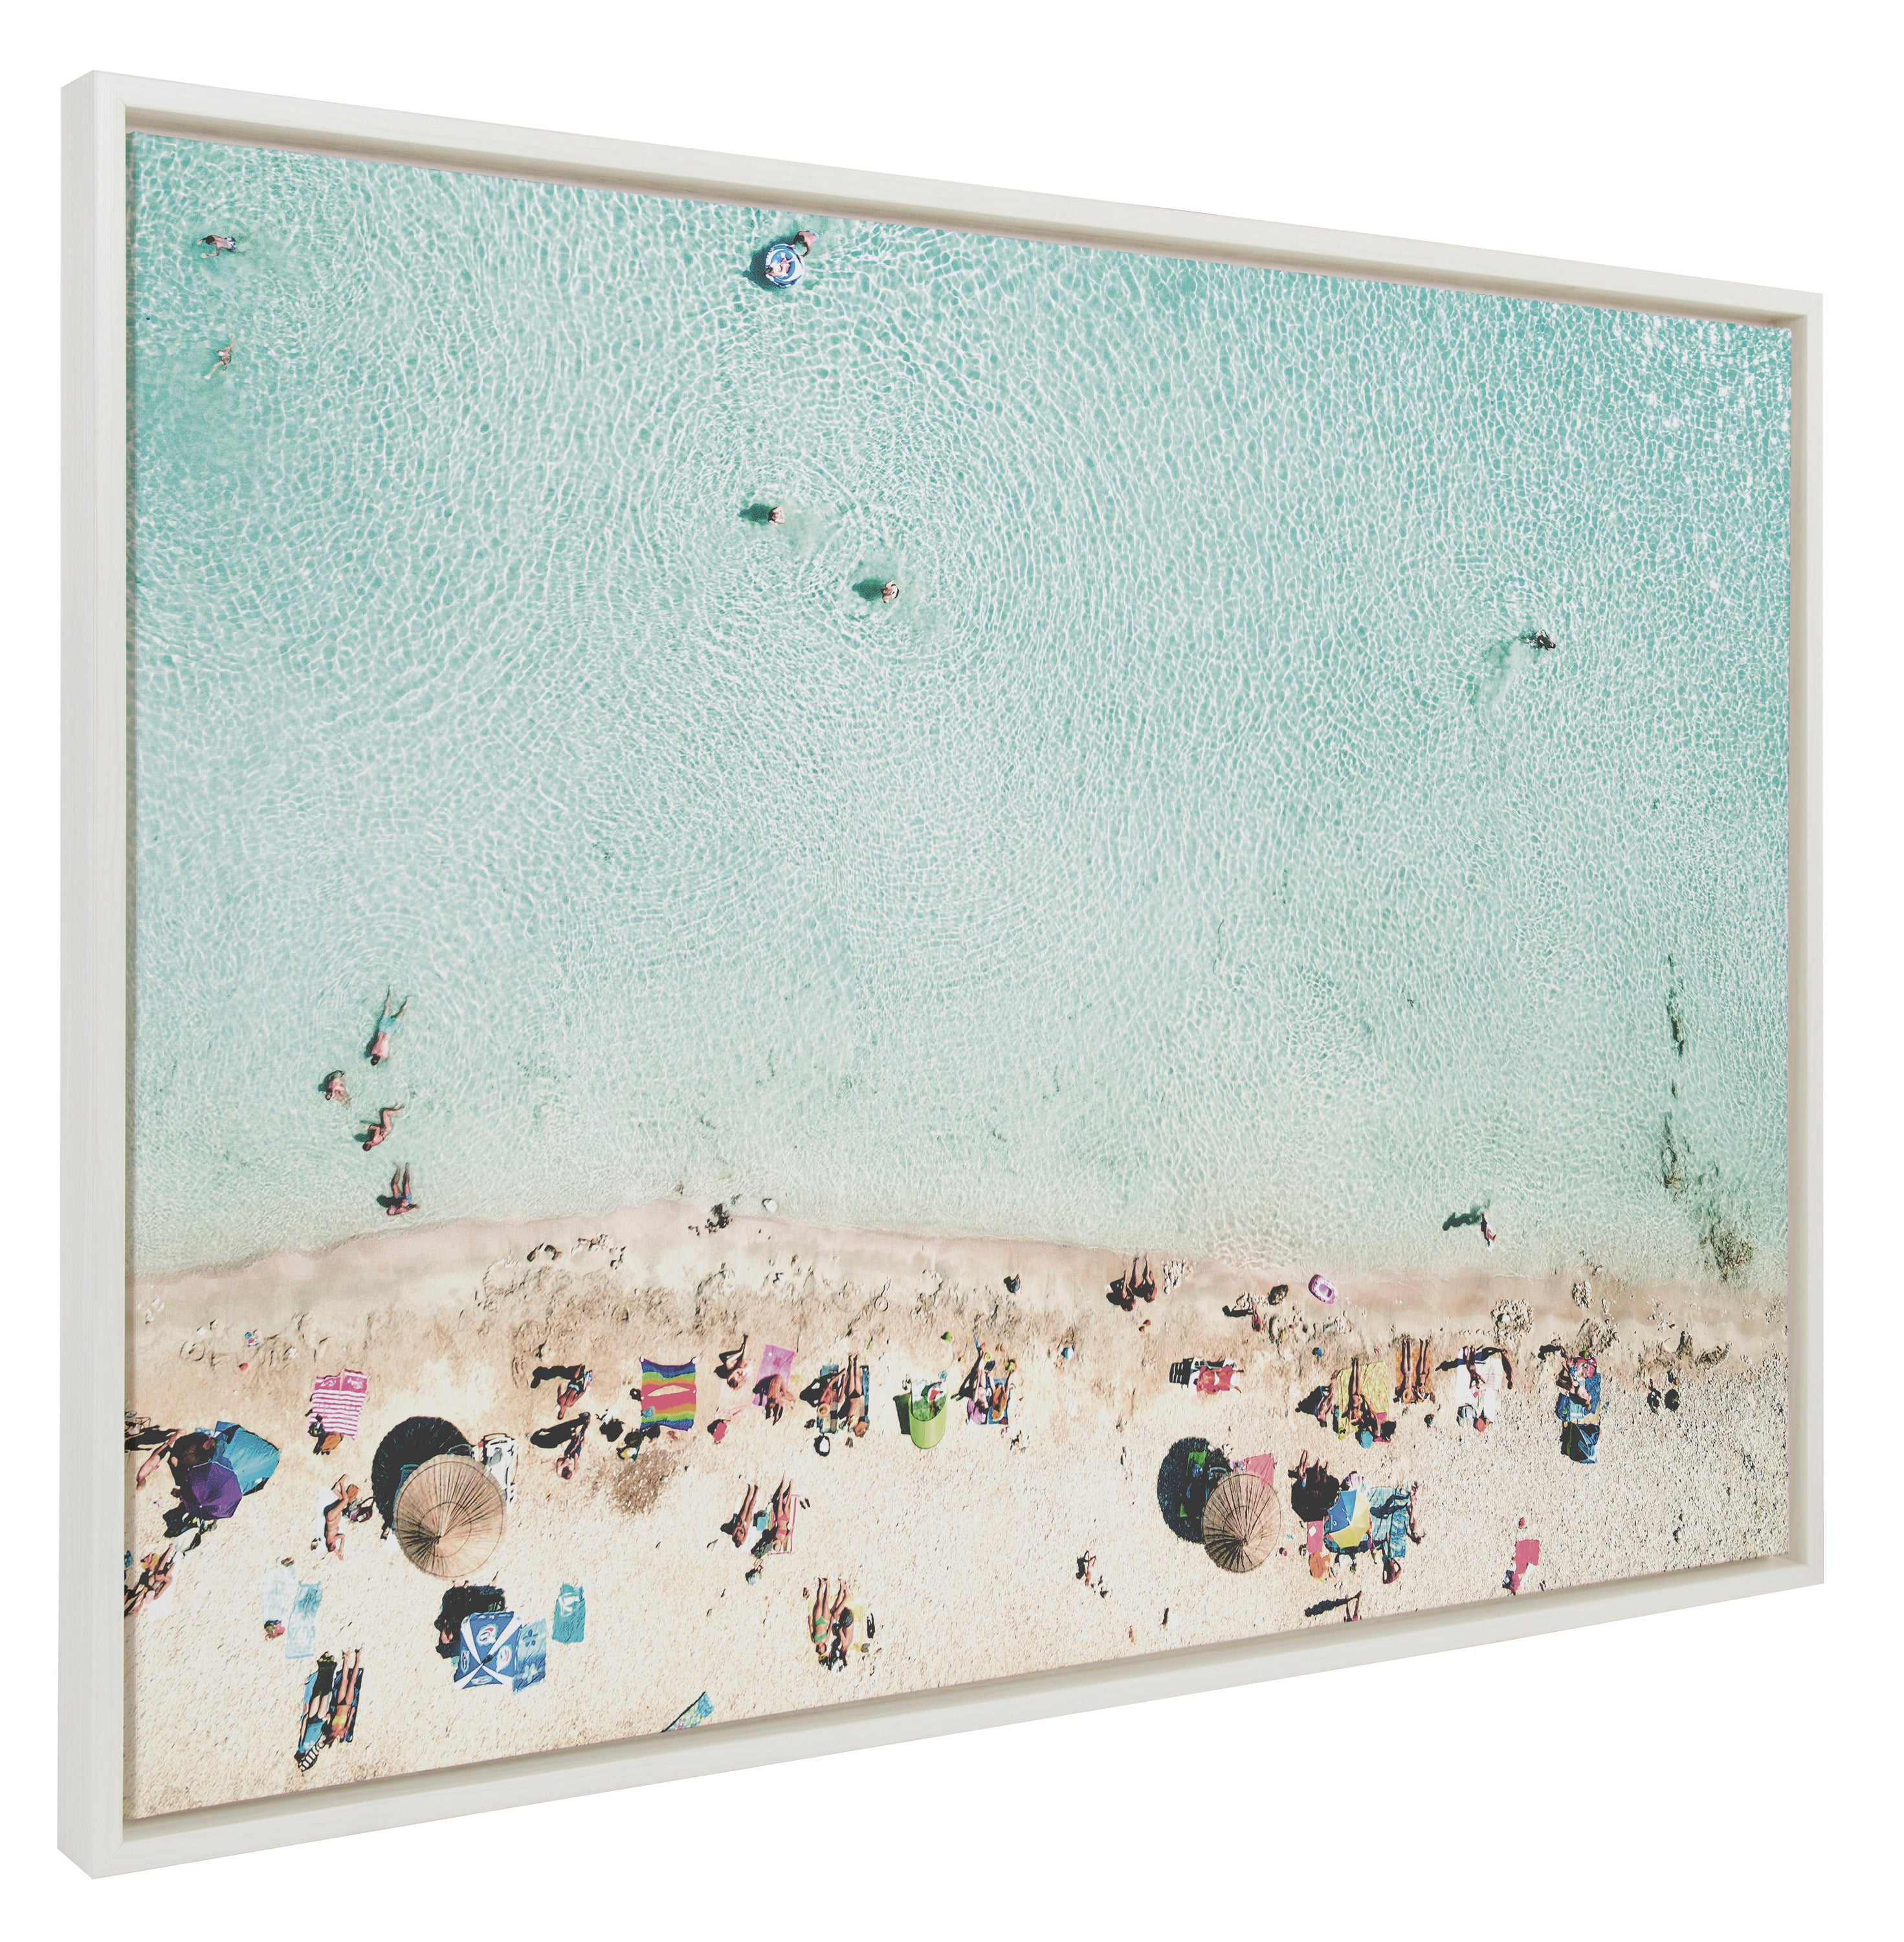 Sylvie Turquoise Beach from Above Framed Canvas by Amy Peterson Art Studio